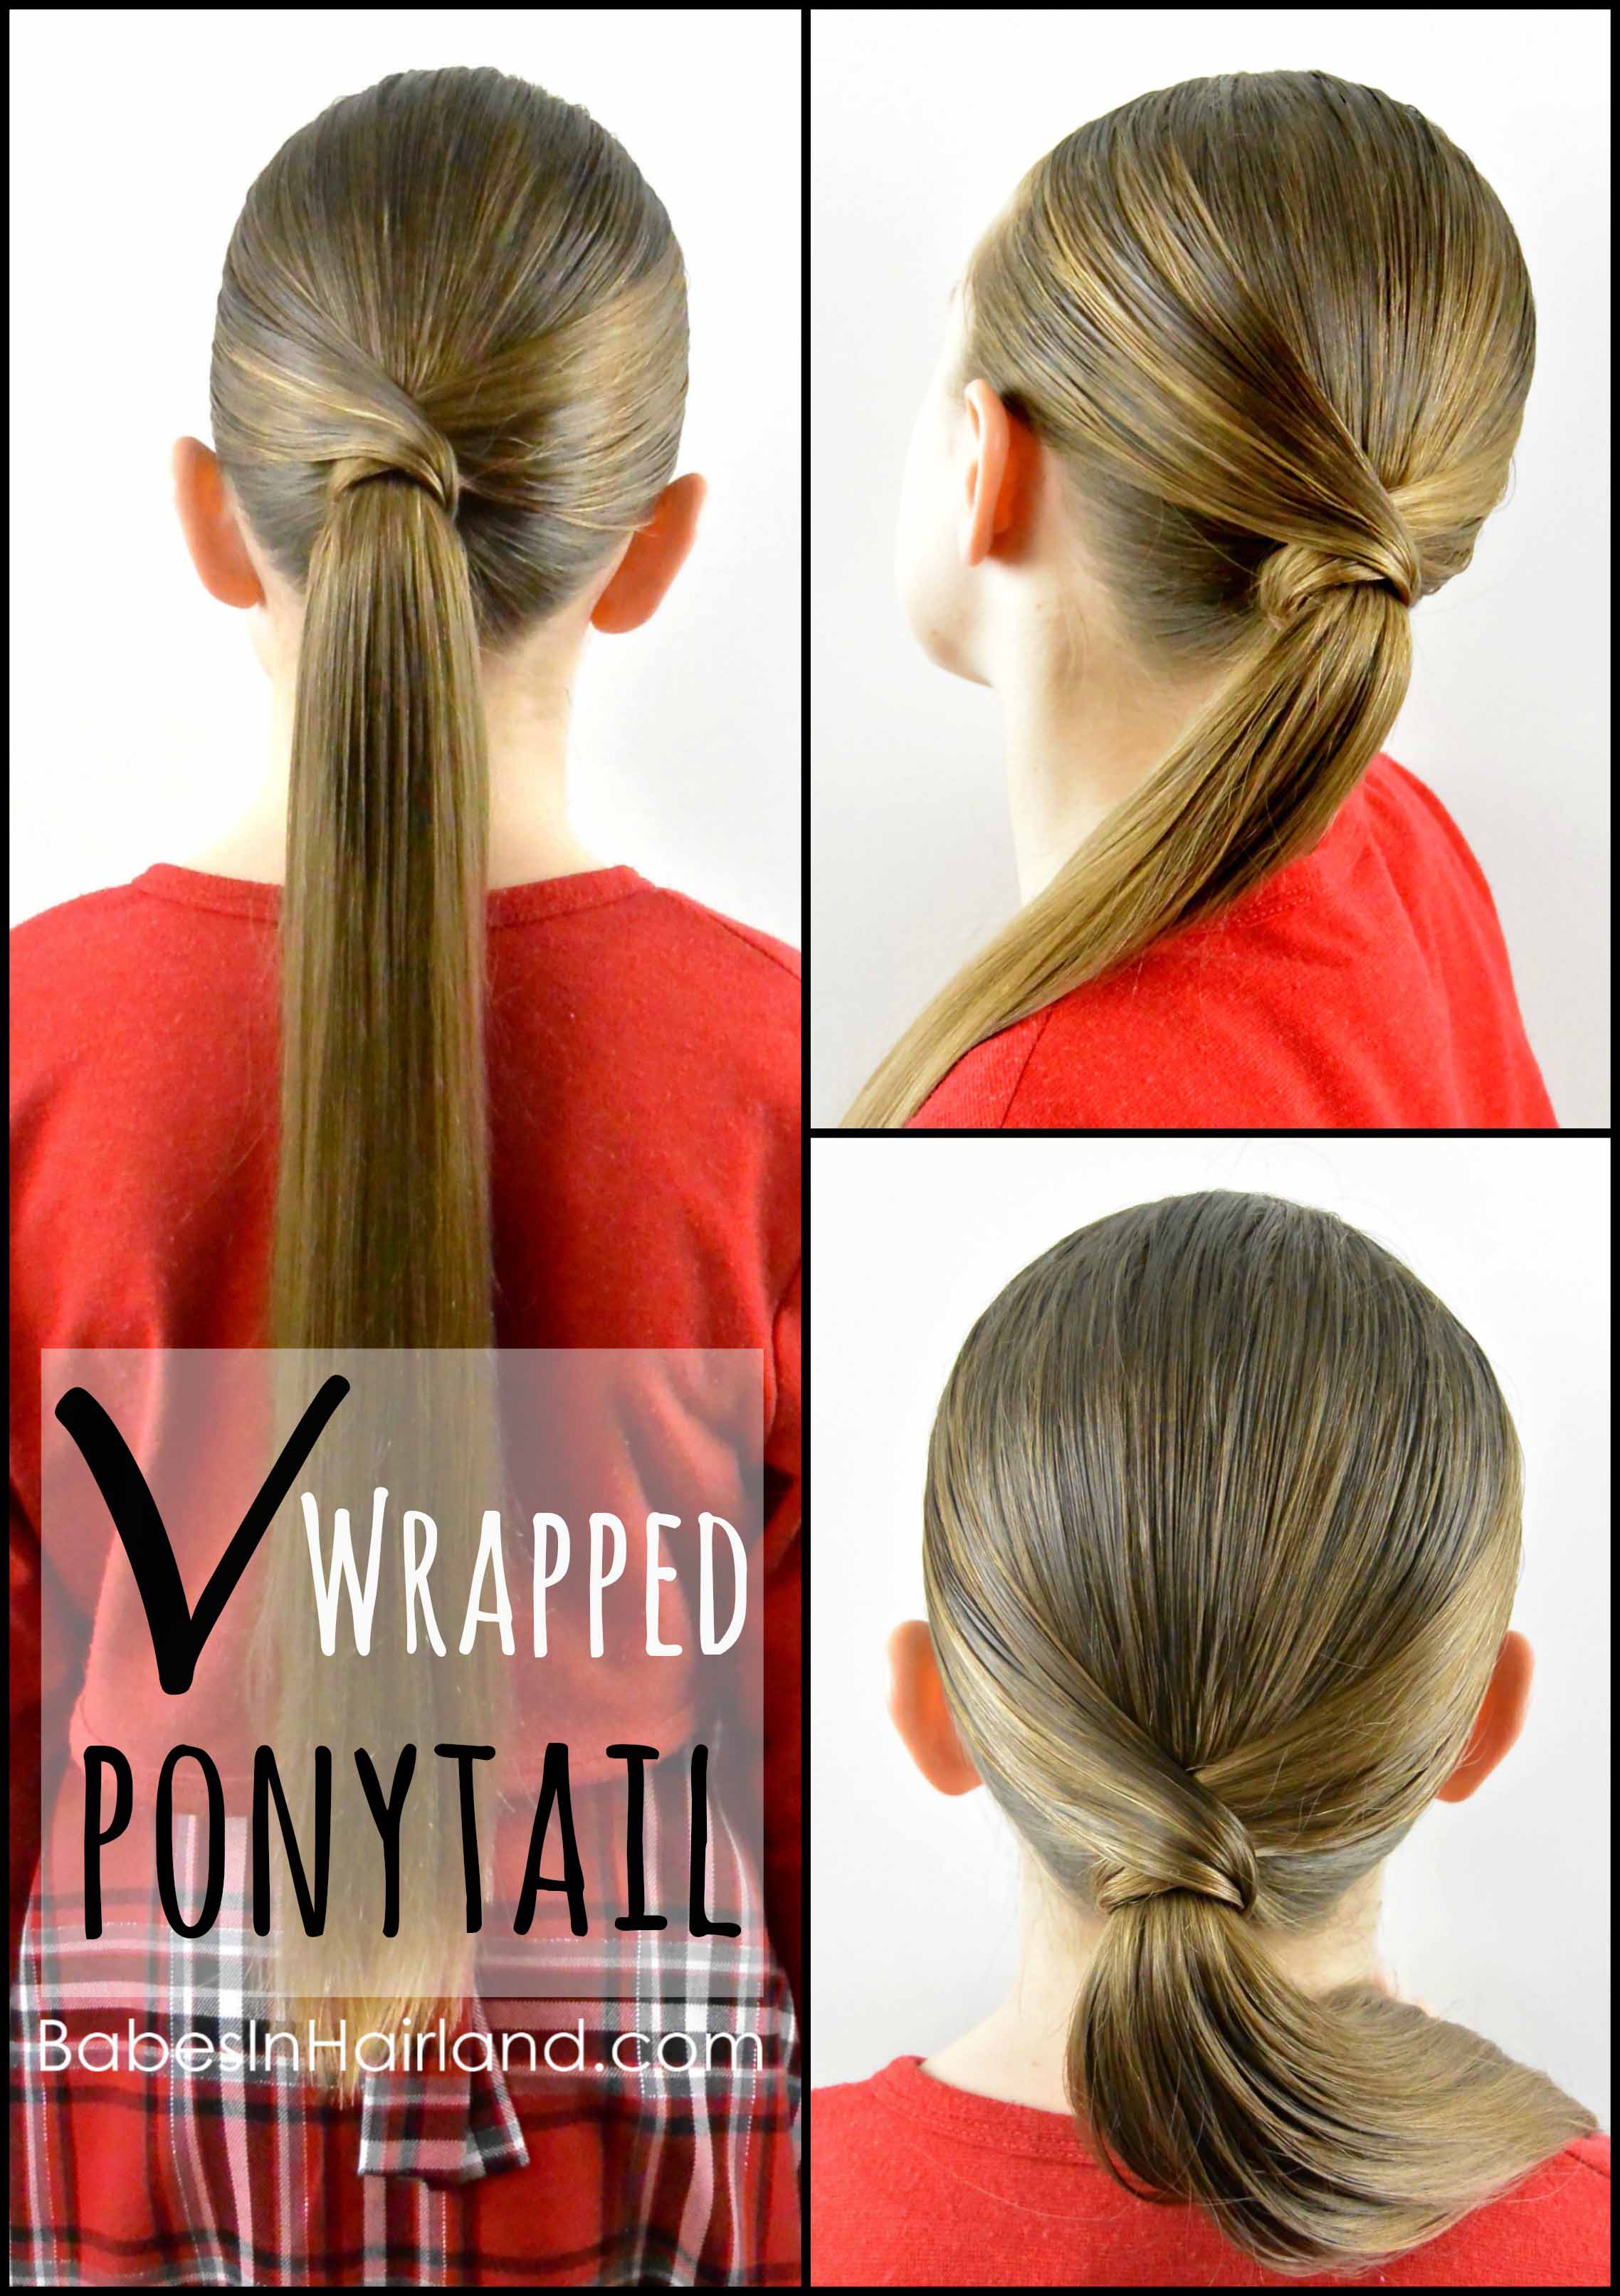 V Wrapped Ponytail - Babes In Hairland